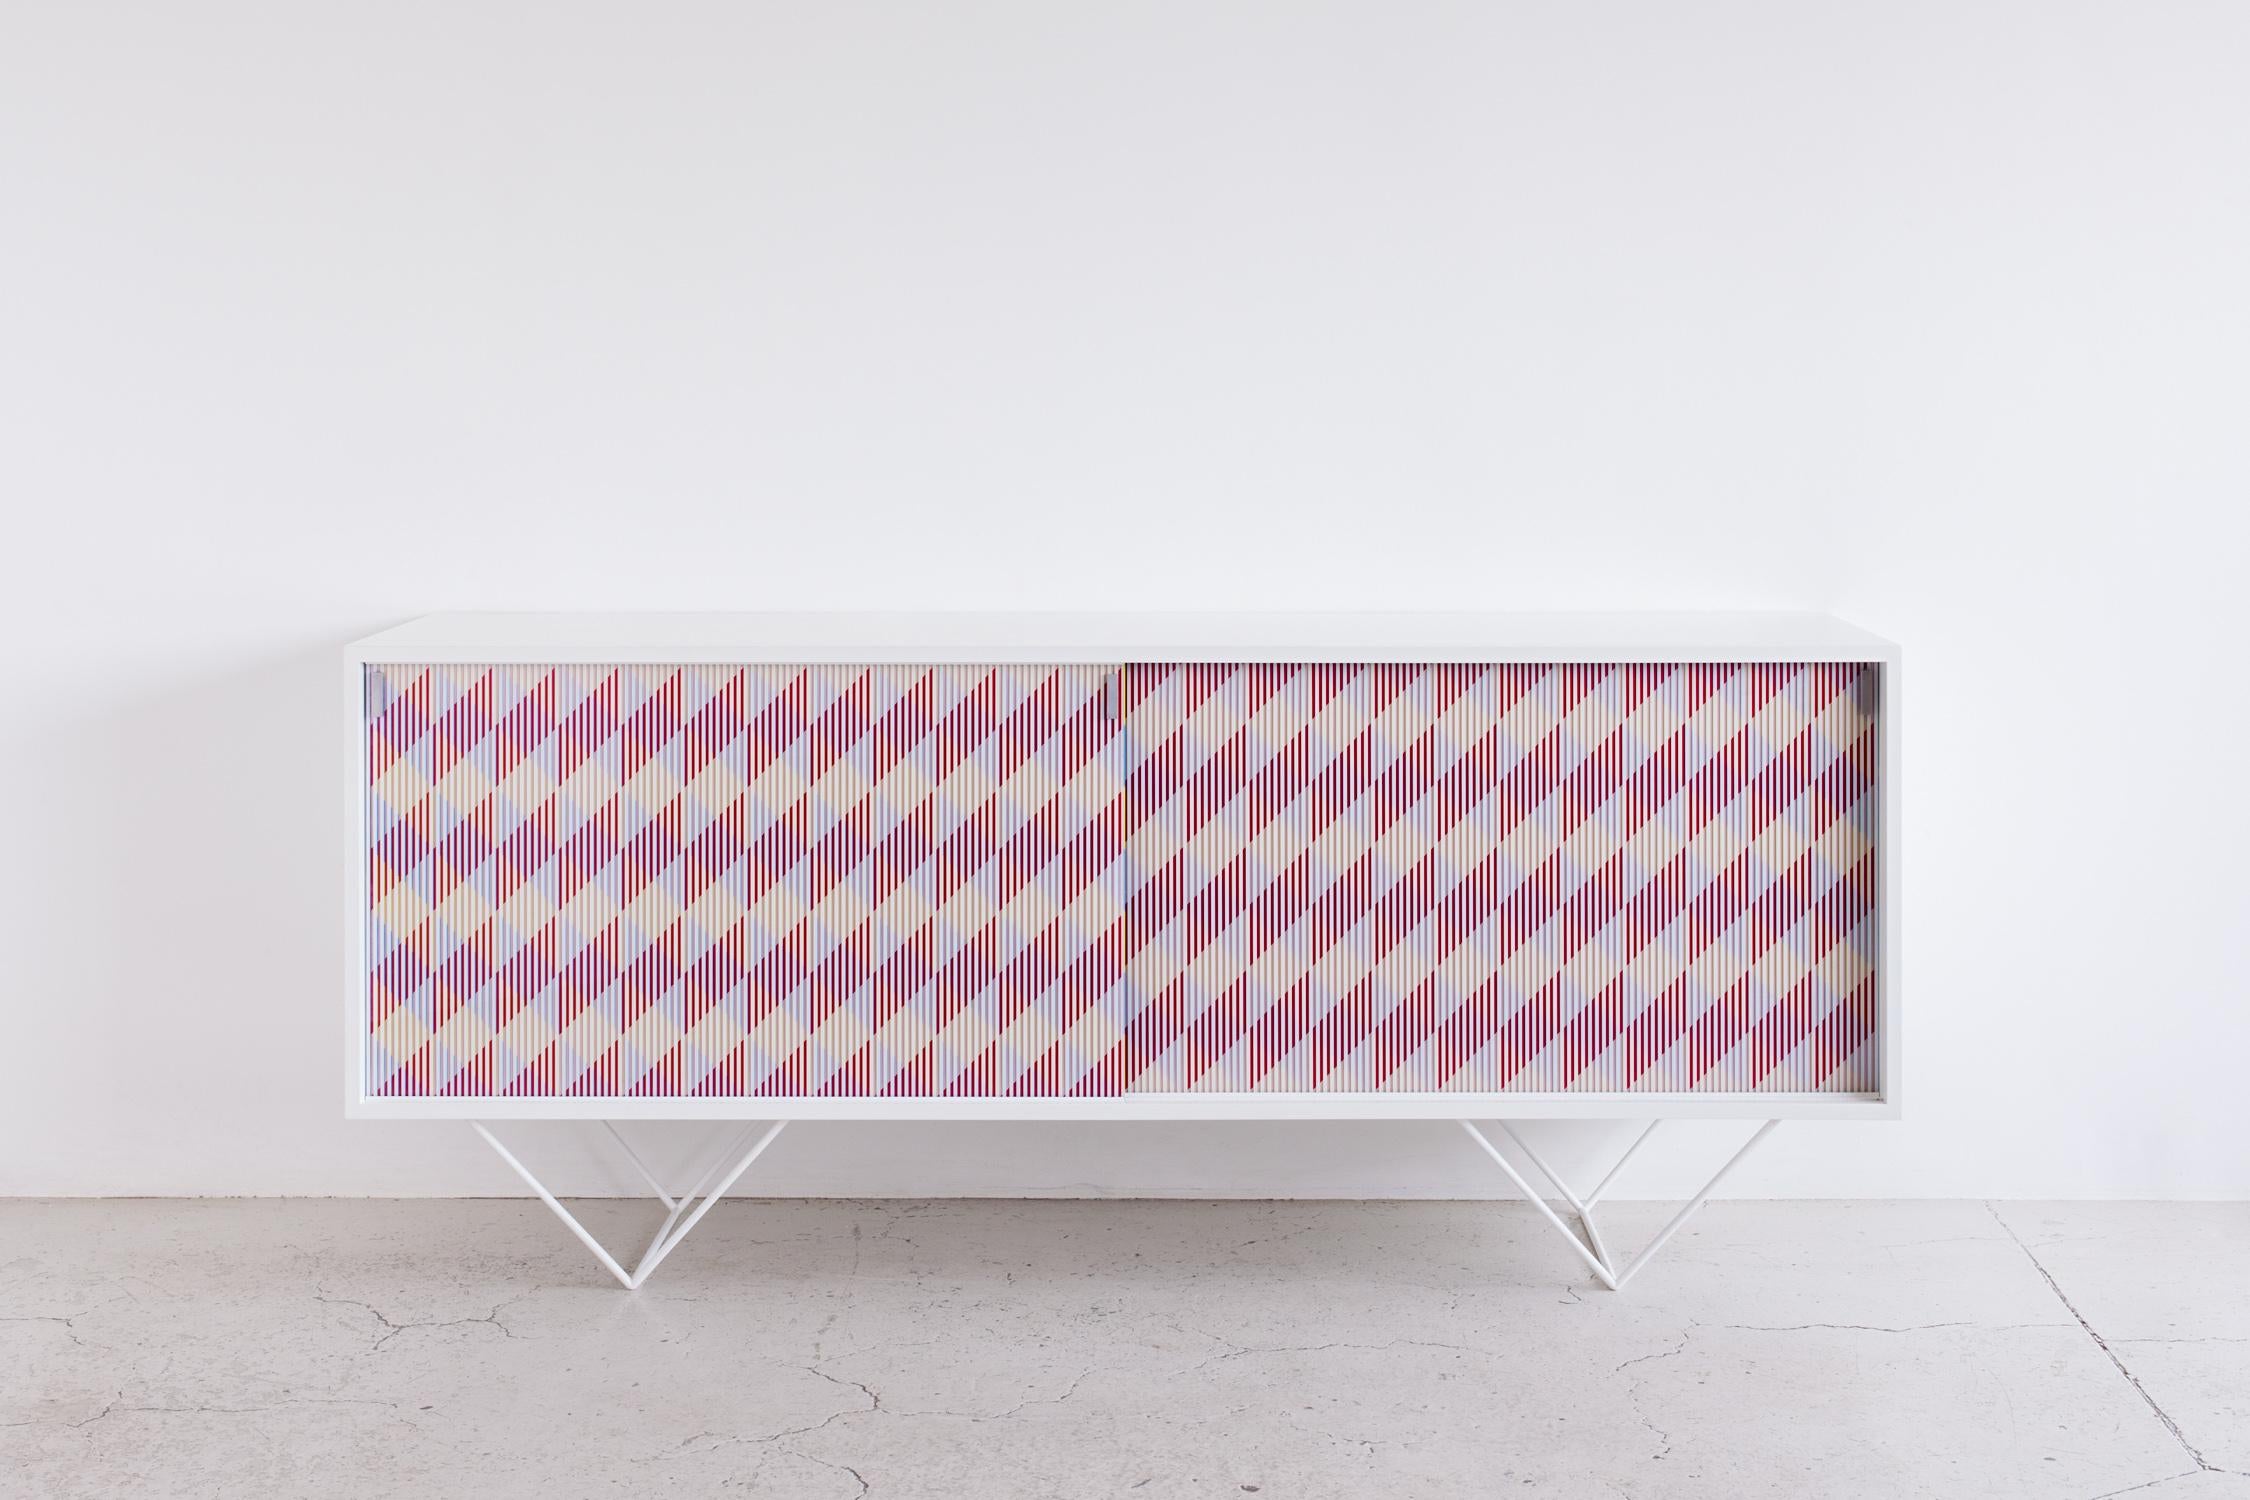 Circus Sideboard by Studio Roso
Dimensions: D177 x W75 x H47 cm
Material: Wood, glass, steel
Weight: 46 kg 

Studio Roso is a partnership between Sophie Nielsen and Rolf Knudsen.
The studio has in the last 10 years produced a number of large